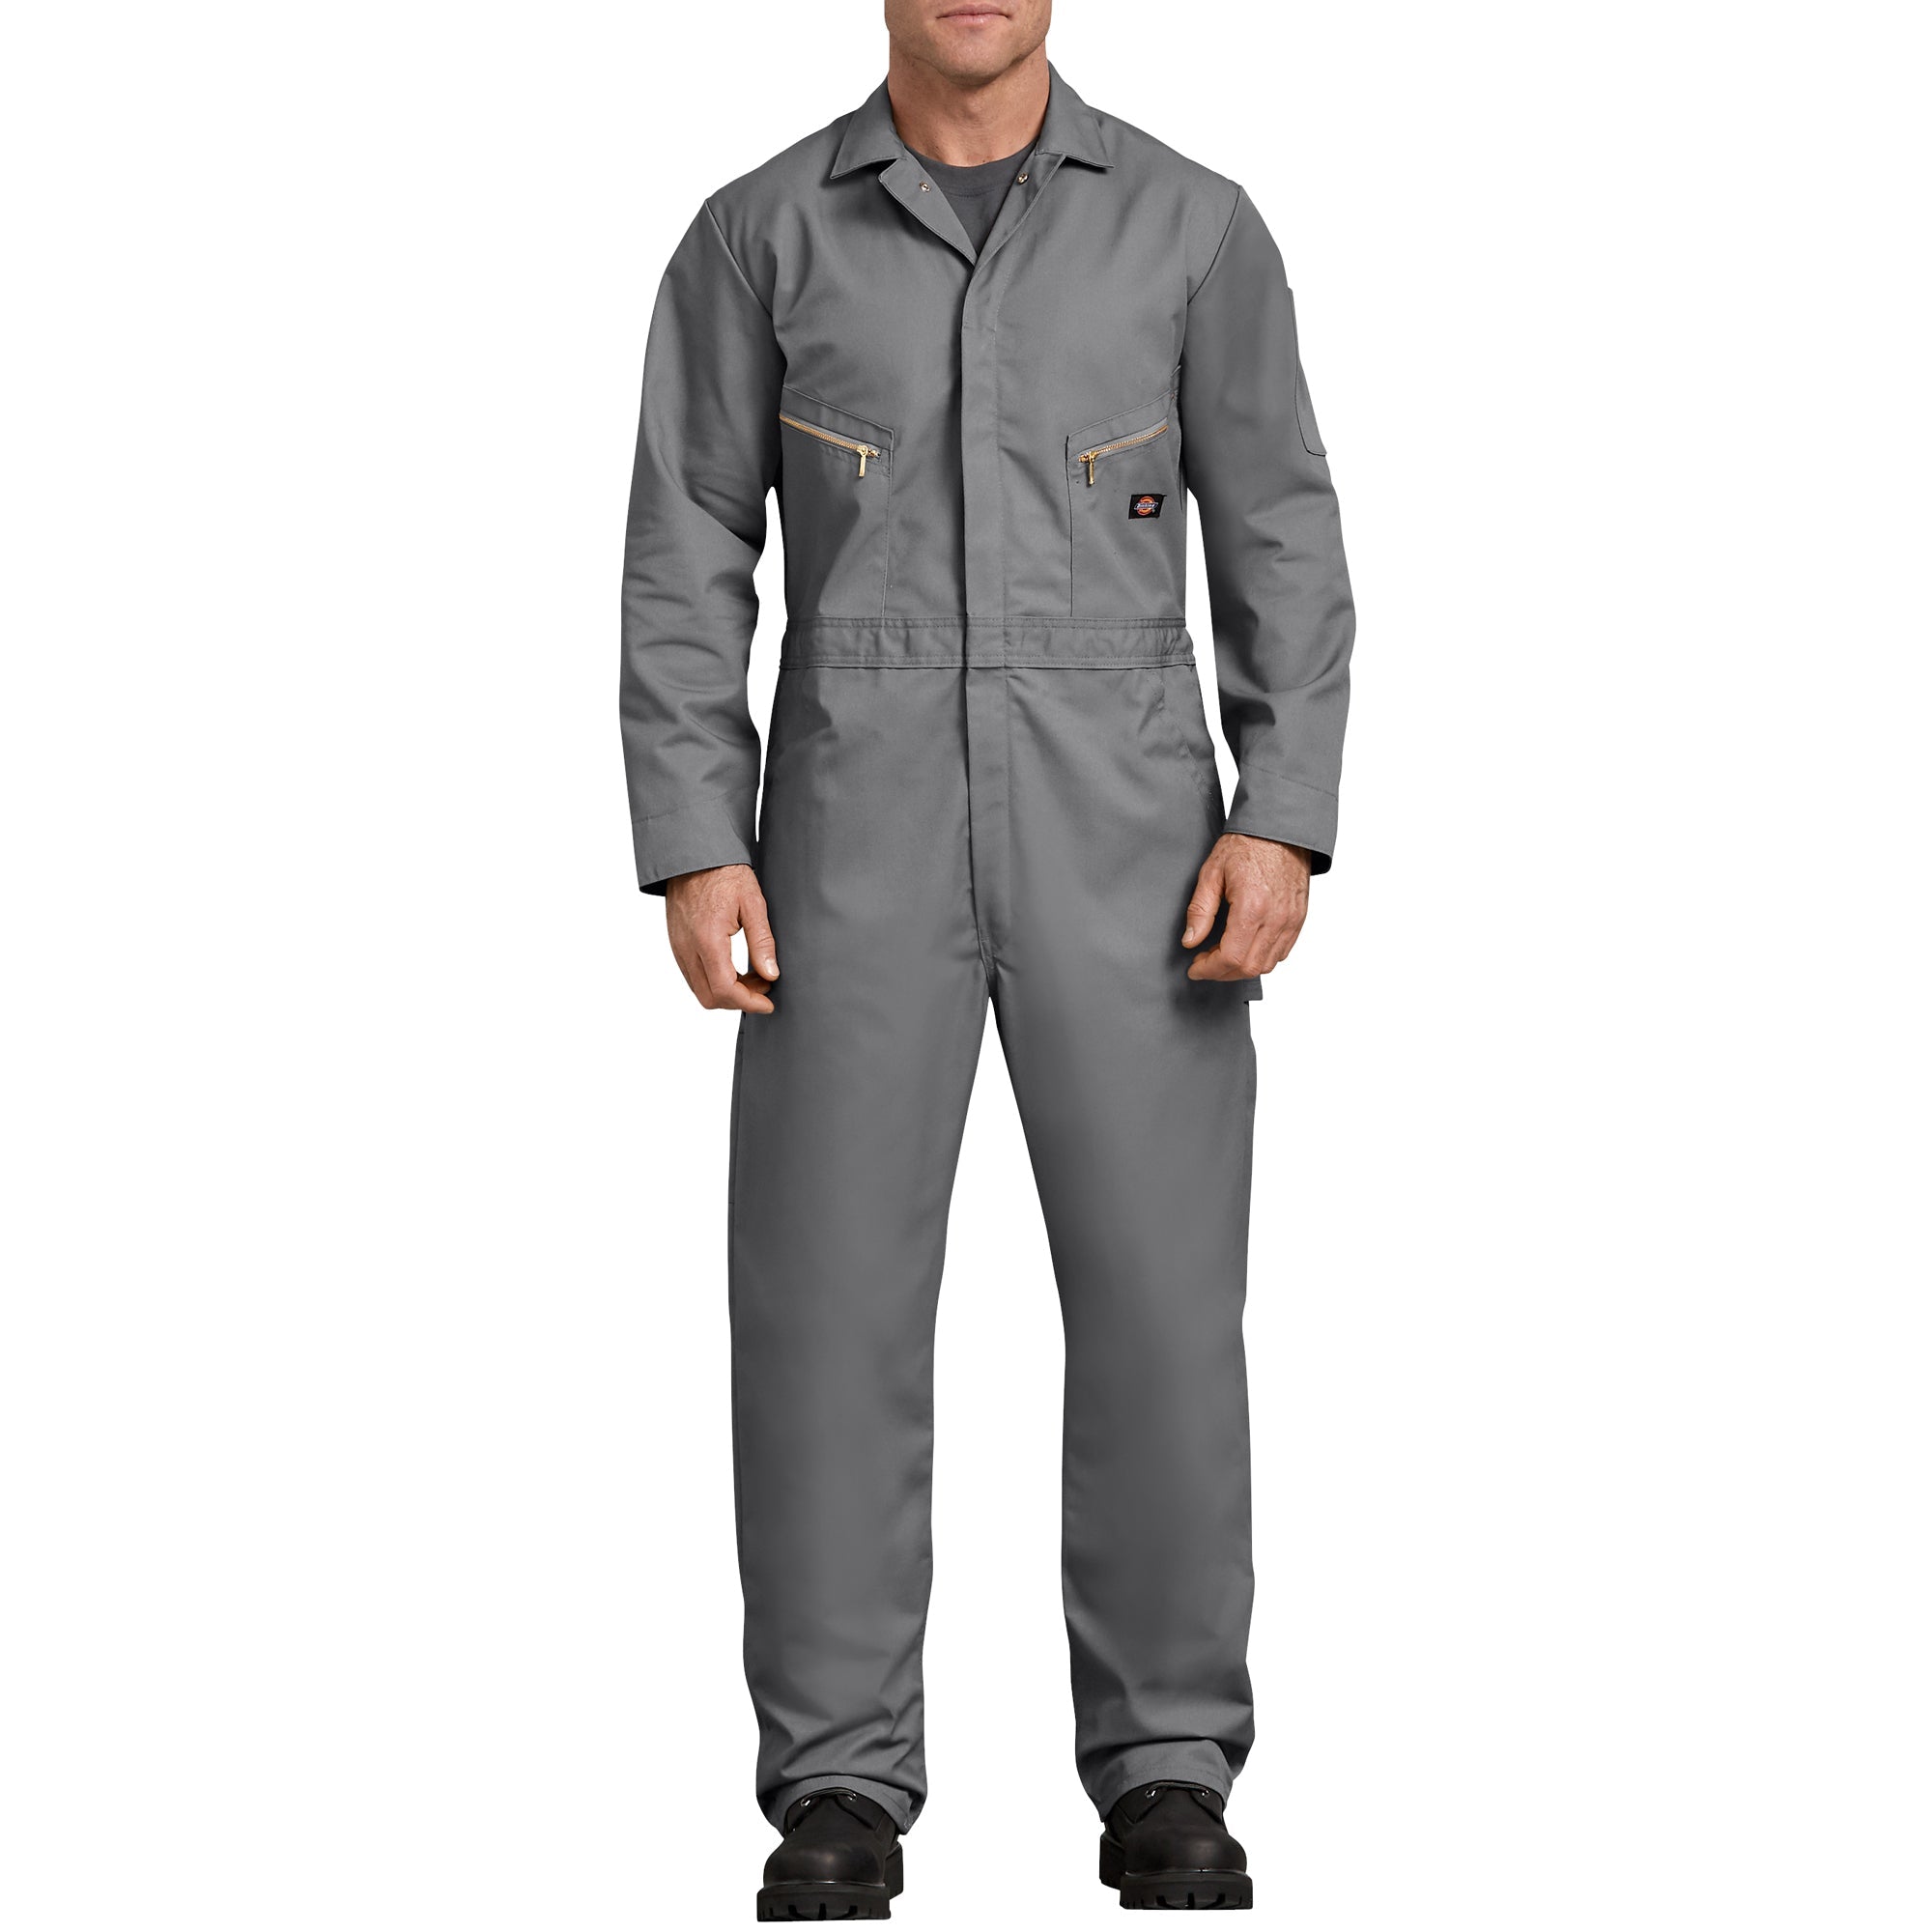 Men's Long Sleeve Broadcloth Pajama Jumpsuit #601JZ – Professional Fit  Clothing